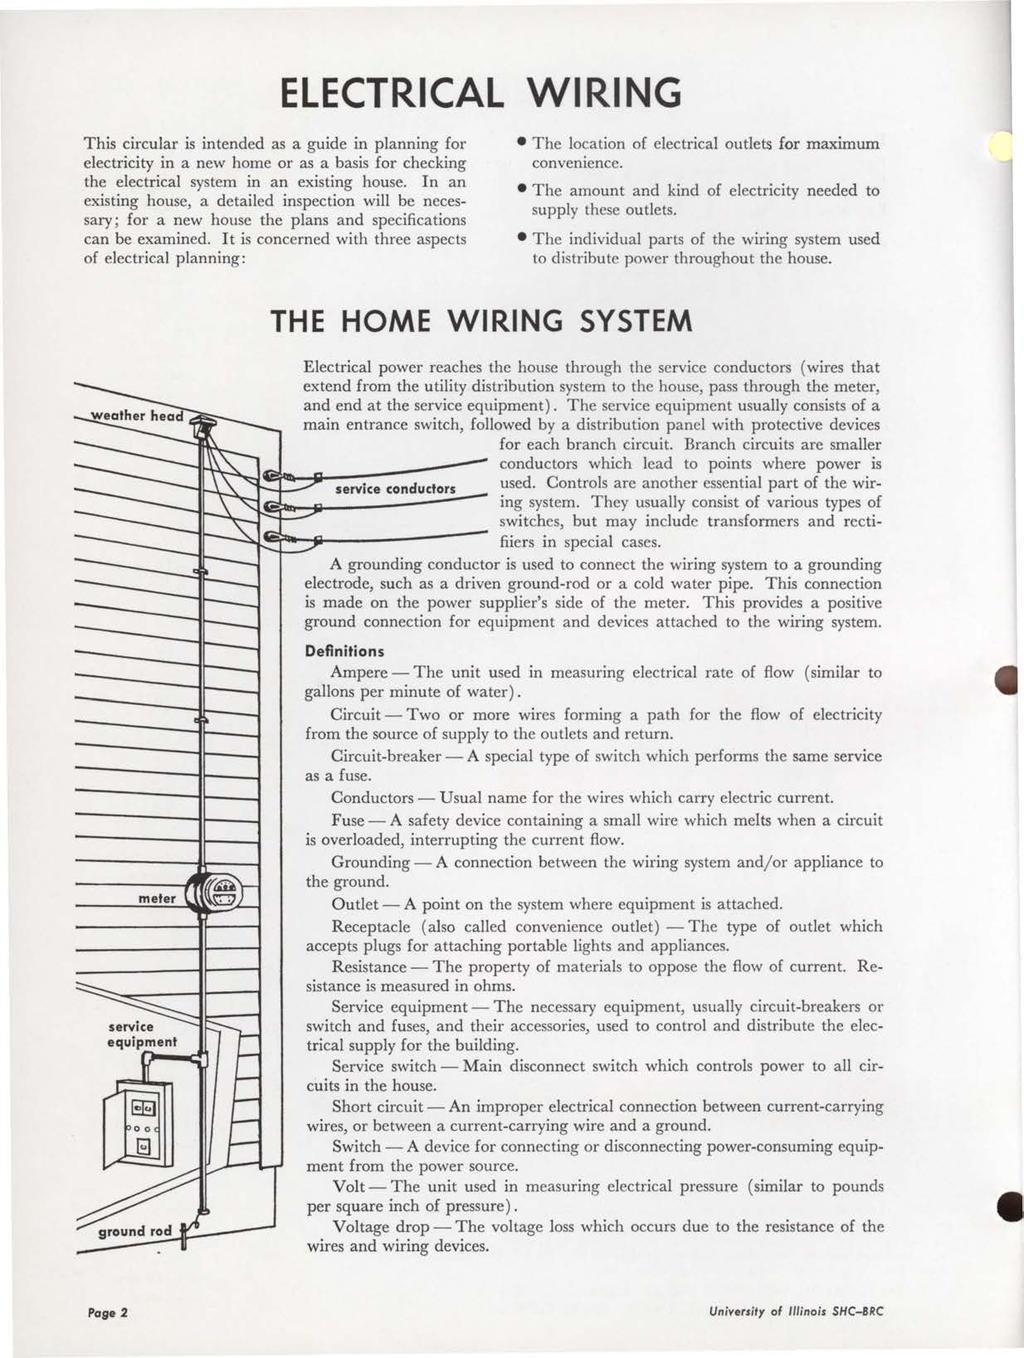 ELECTRICAL WIRING This circular is intended as a guide in planning for electricity in a new home or as a basis for checking the electrical system in an existing house.